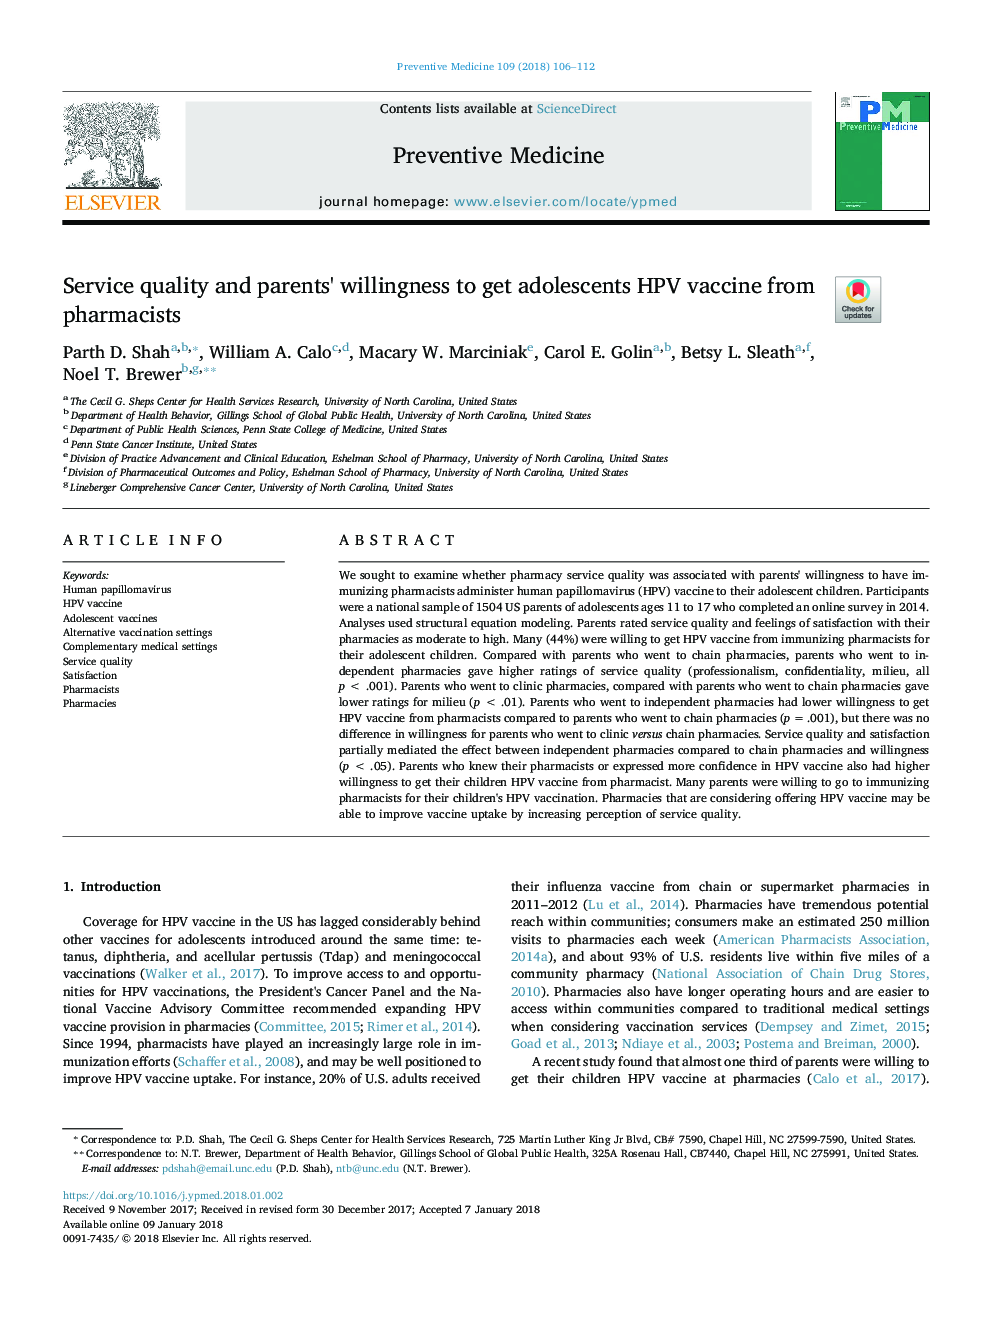 Service quality and parents' willingness to get adolescents HPV vaccine from pharmacists